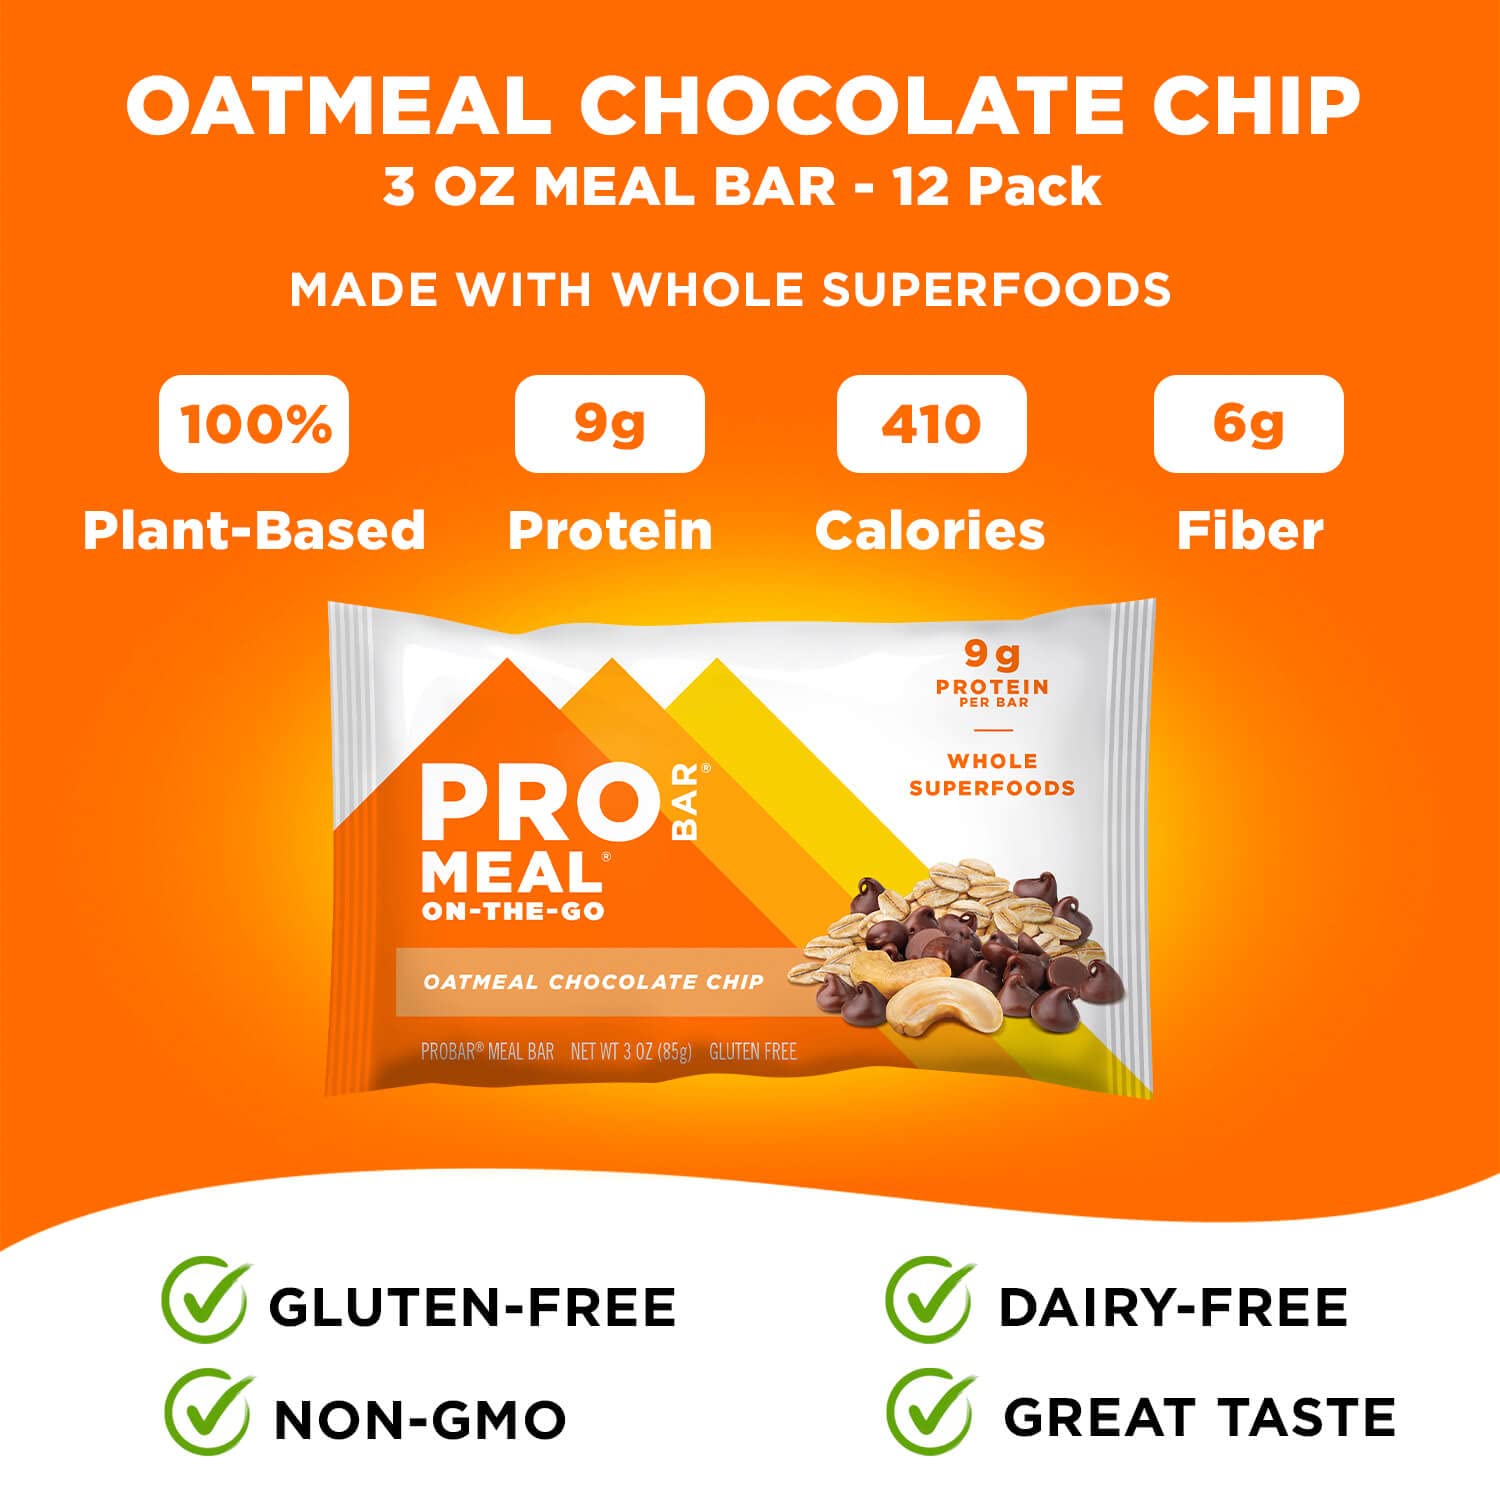 PROBAR - Meal Bar, Oatmeal Chocolate Chip, Non-GMO, Gluten-Free, Healthy, Plant-Based Whole Food Ingredients, Natural Energy, 3 Ounce (Pack of 12)